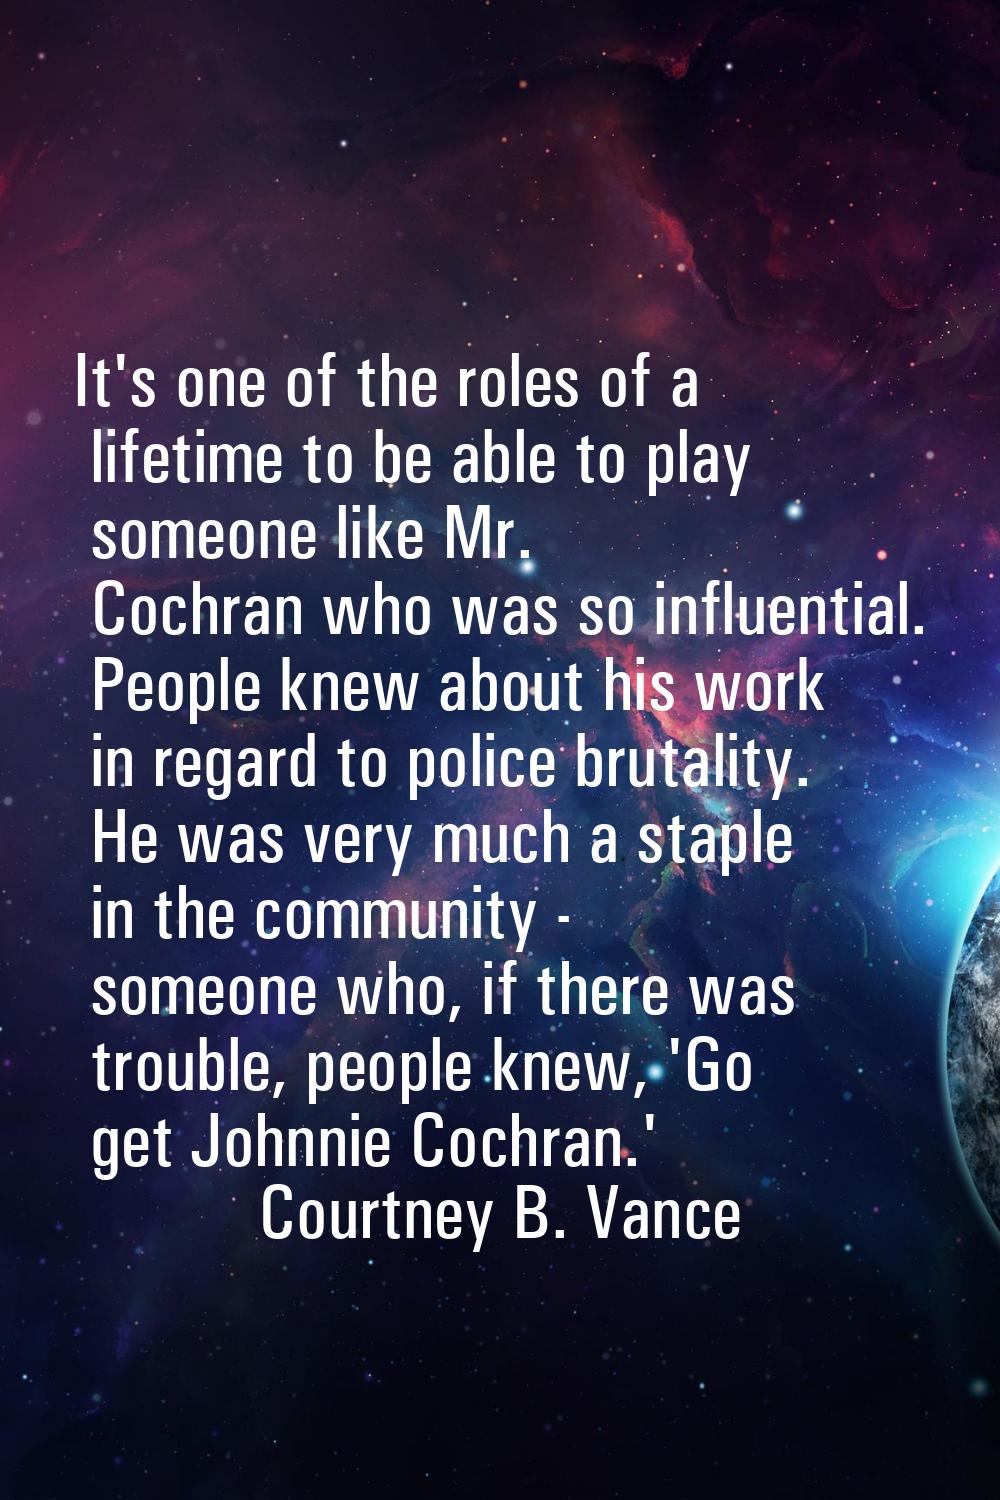 It's one of the roles of a lifetime to be able to play someone like Mr. Cochran who was so influent